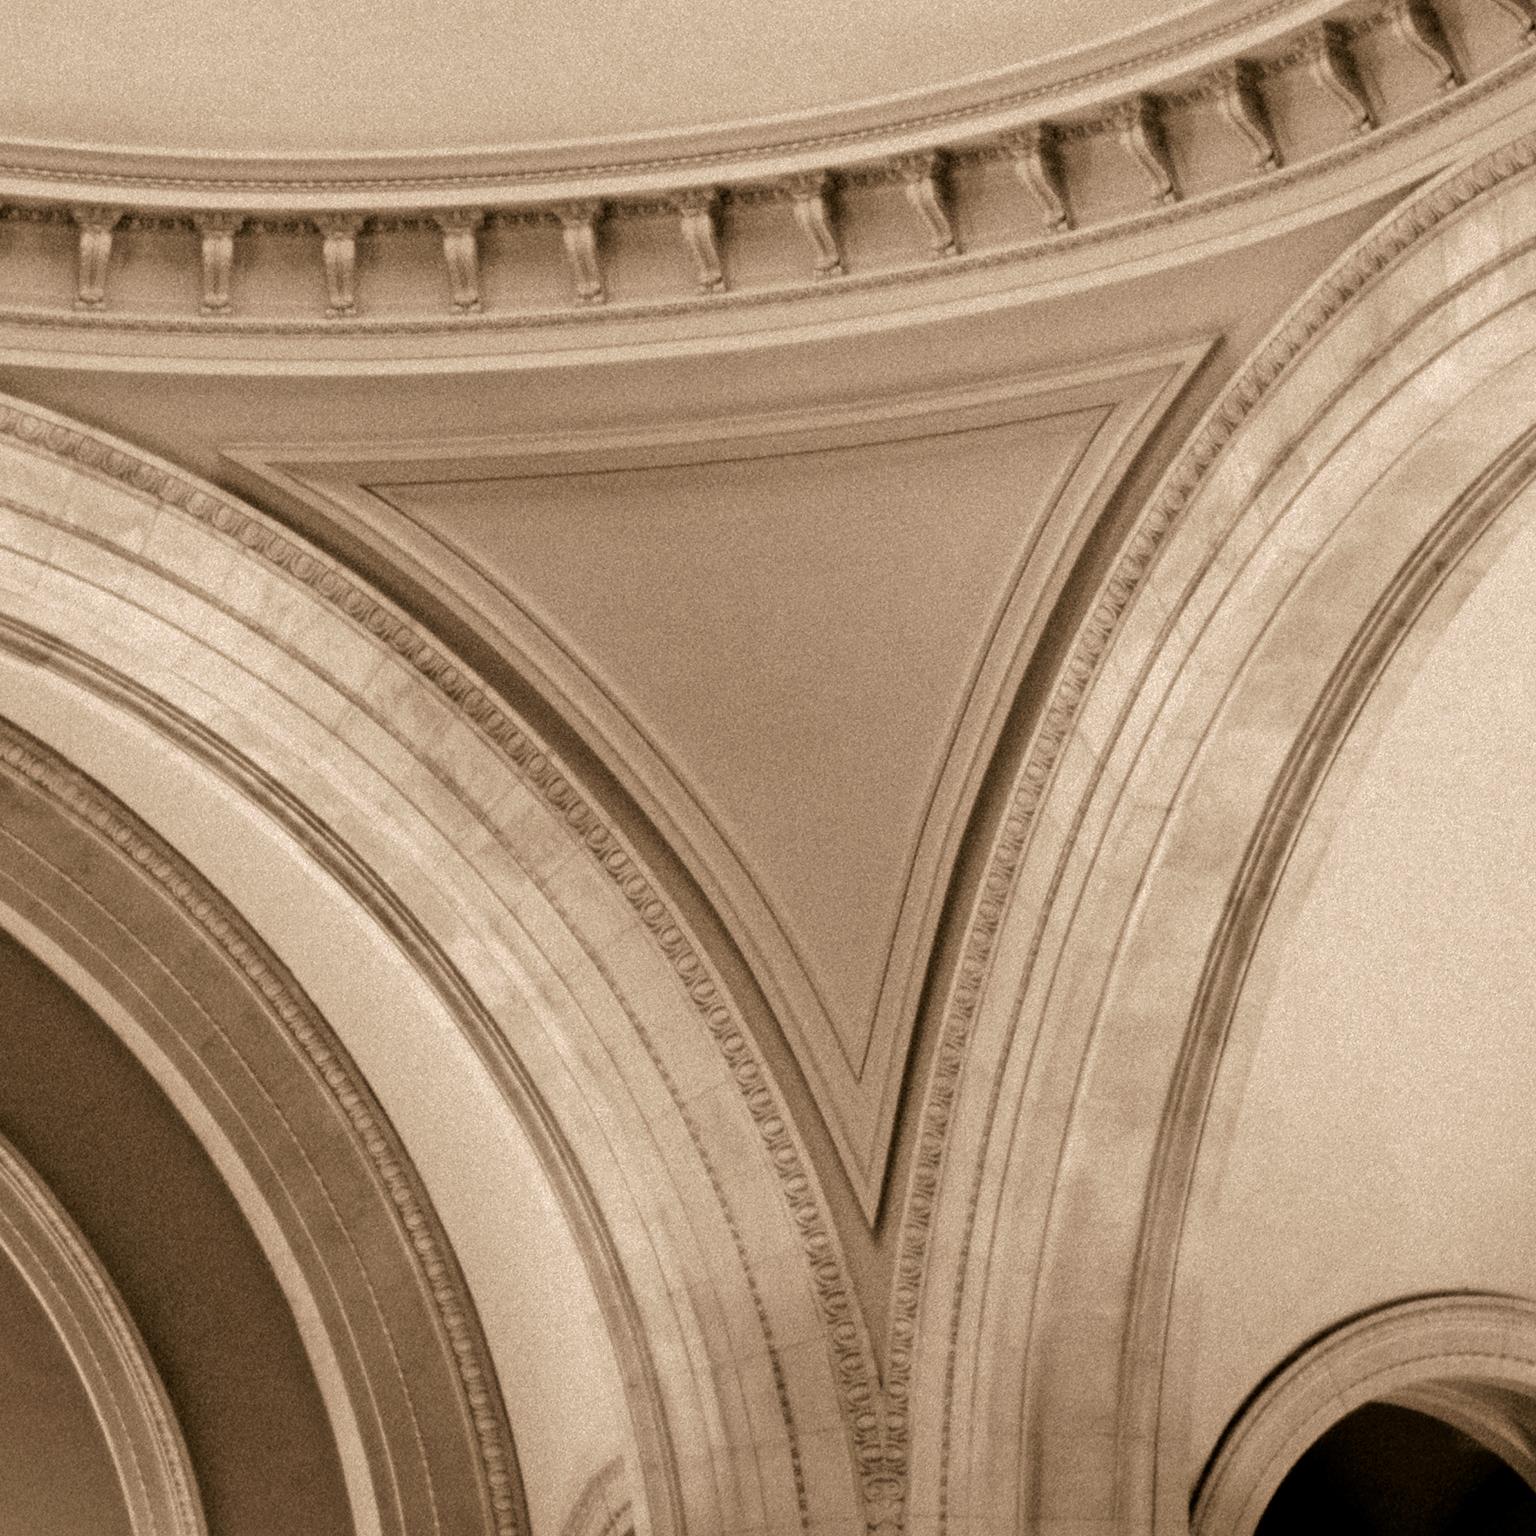 Symphony of Arches. New York City, USA, 2001
Photograph by Cosmo Condina. Rotunda of the Metropolitan Museum of Art. 
Archival pigment print 30 X 44.5 in. Edition of 10. This is # 1/10 in the edition.

Architectural detail of the Great Hall of the